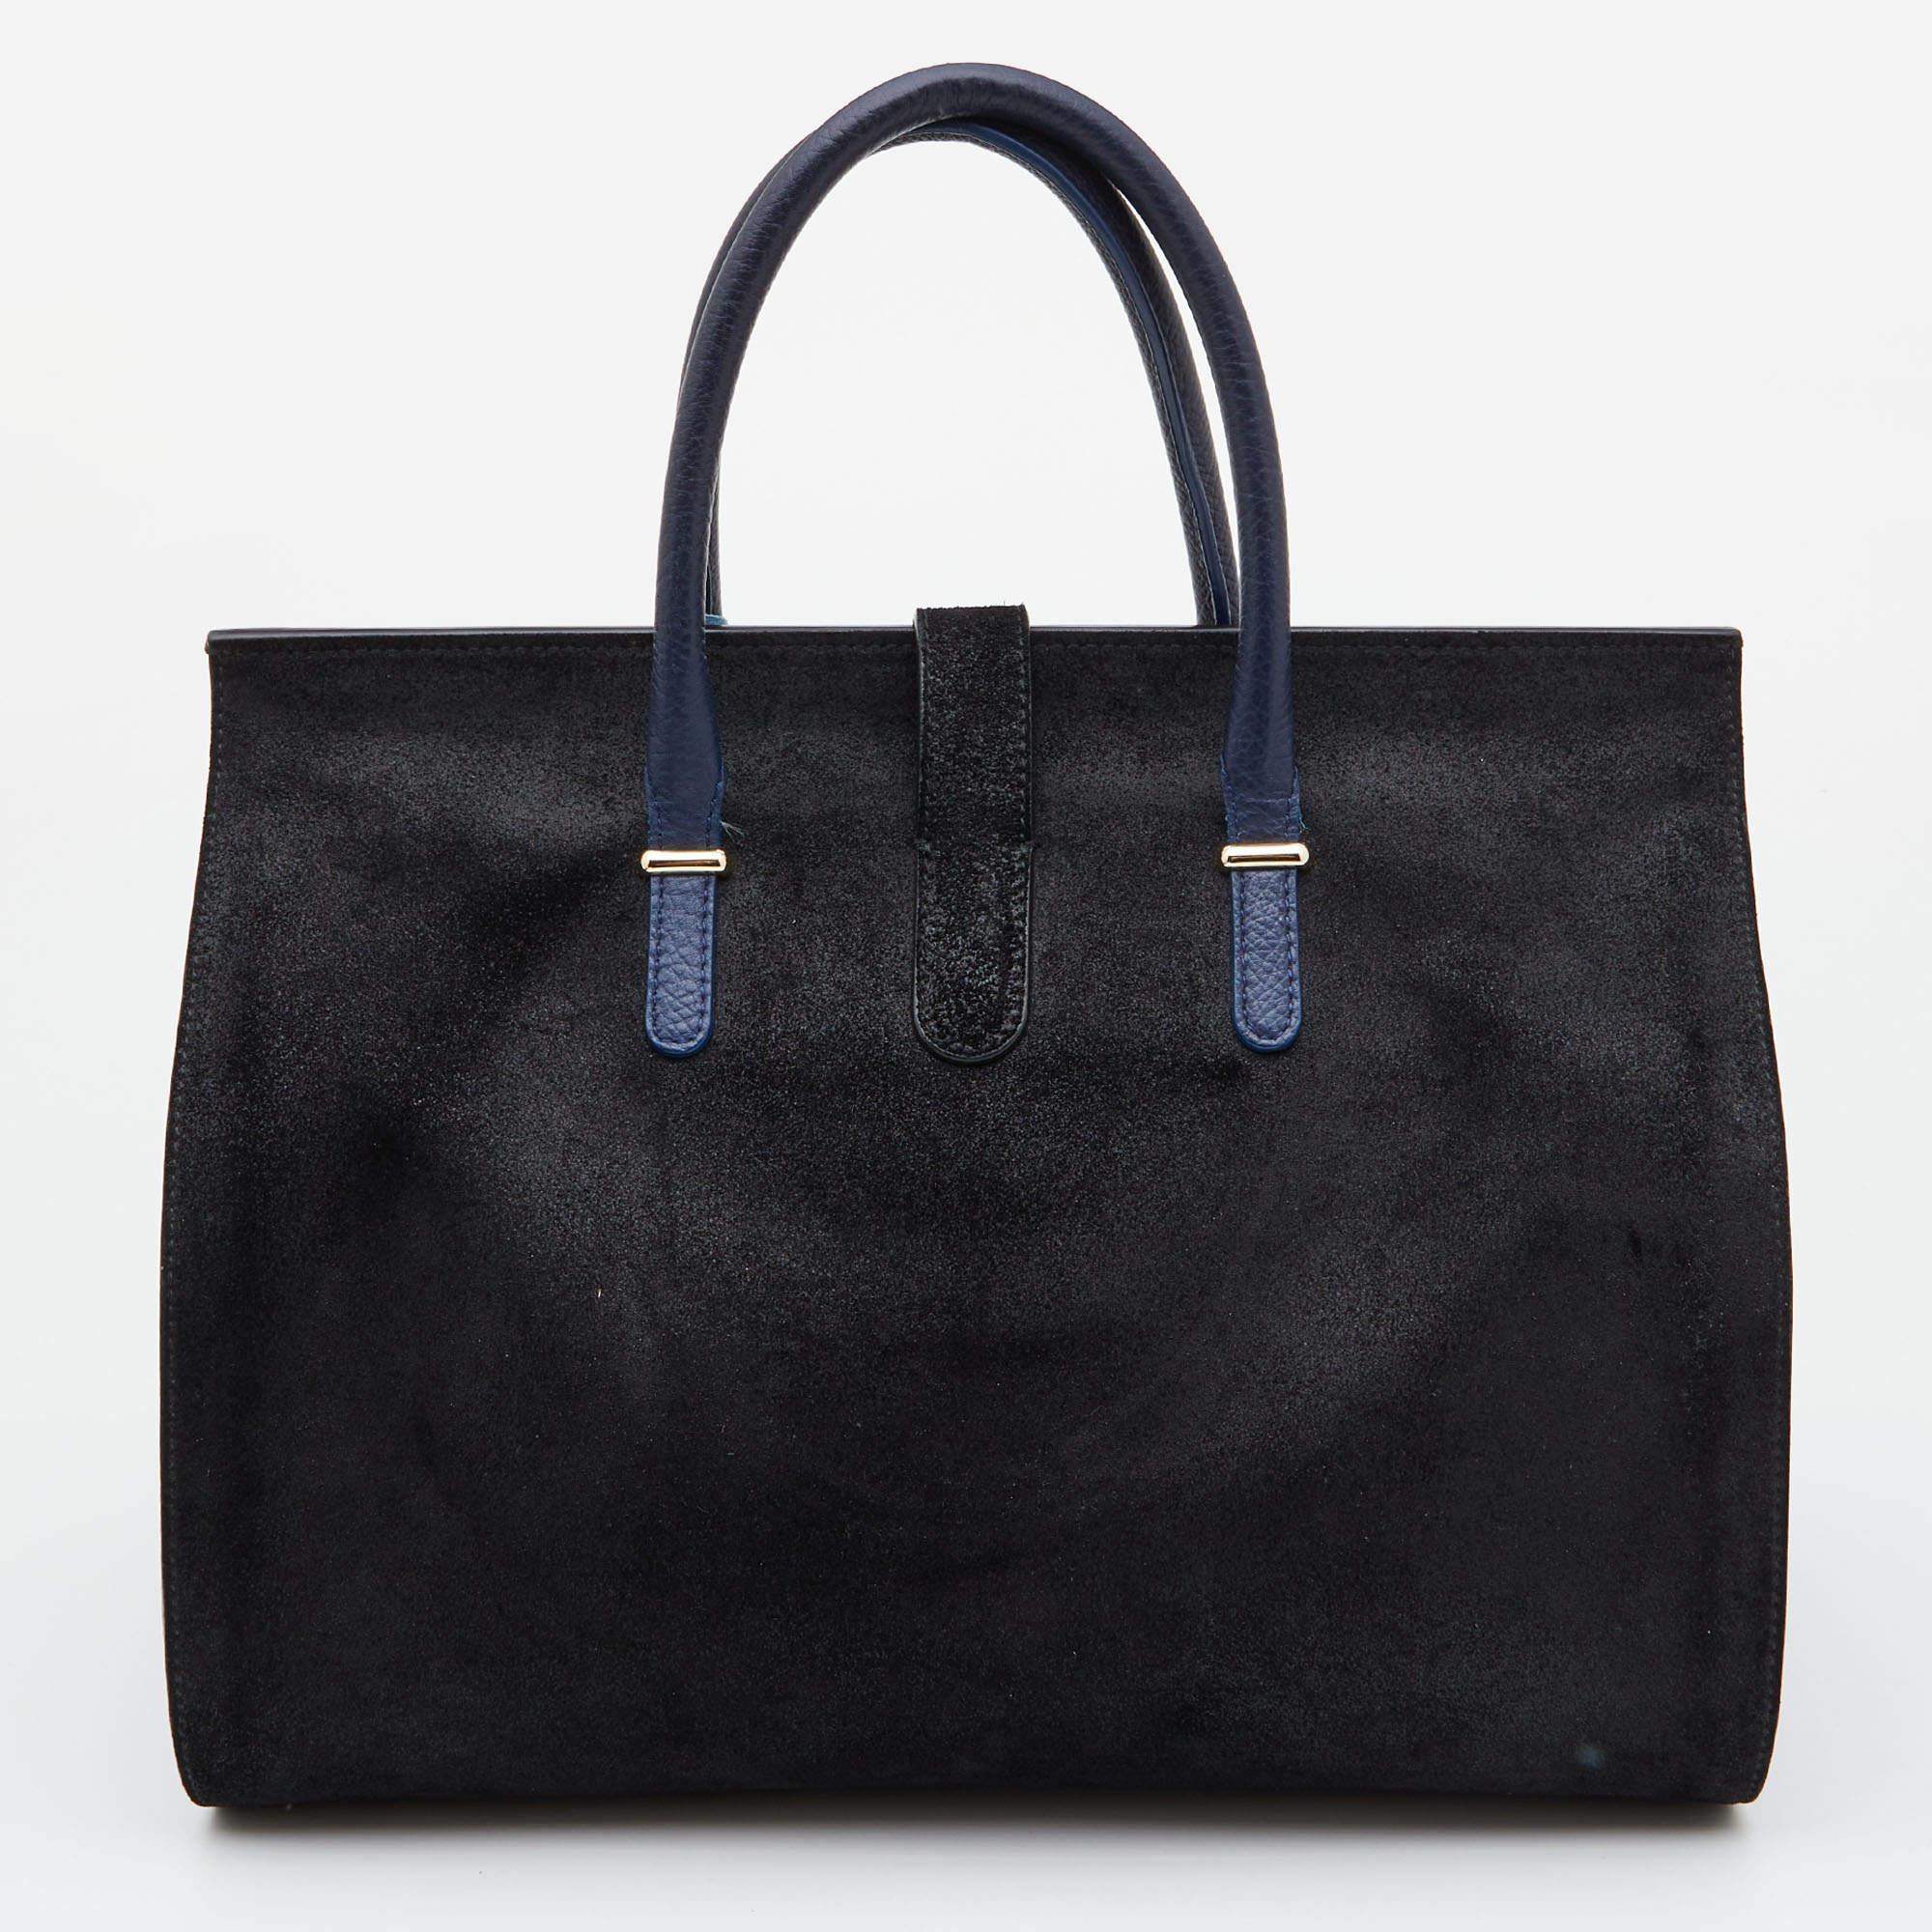 This Balenciaga satchel is rendered in the finest quality materials into an elegant design. Versatile and functional, it is well-sized for your daily use.

Includes: Pocket Mirror